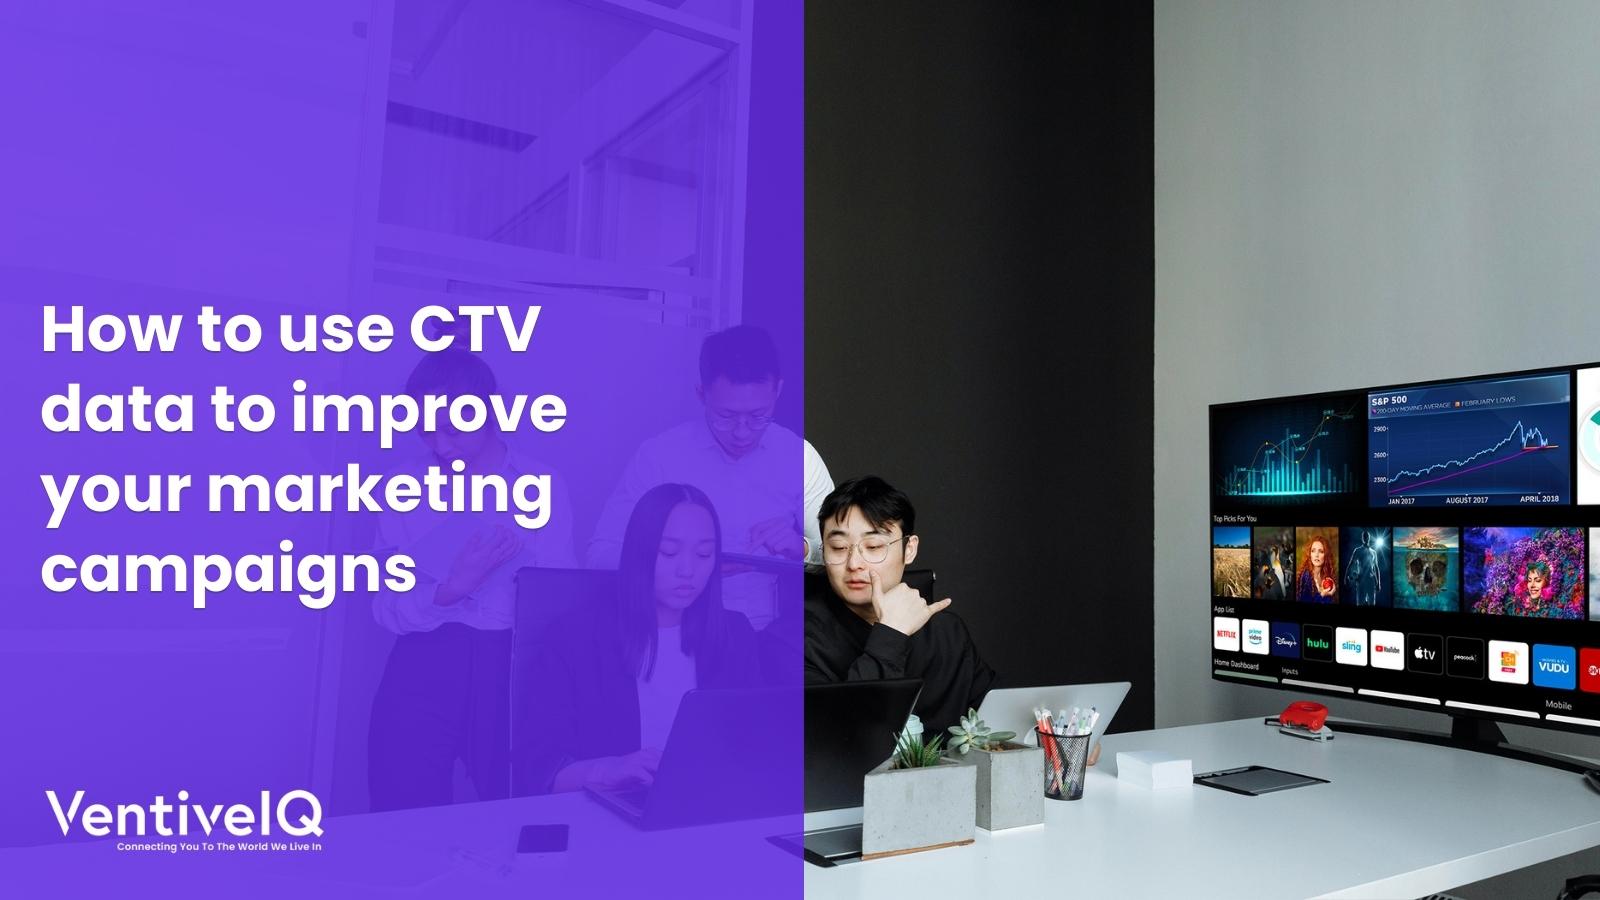 How to use CTV data to improve your marketing campaigns